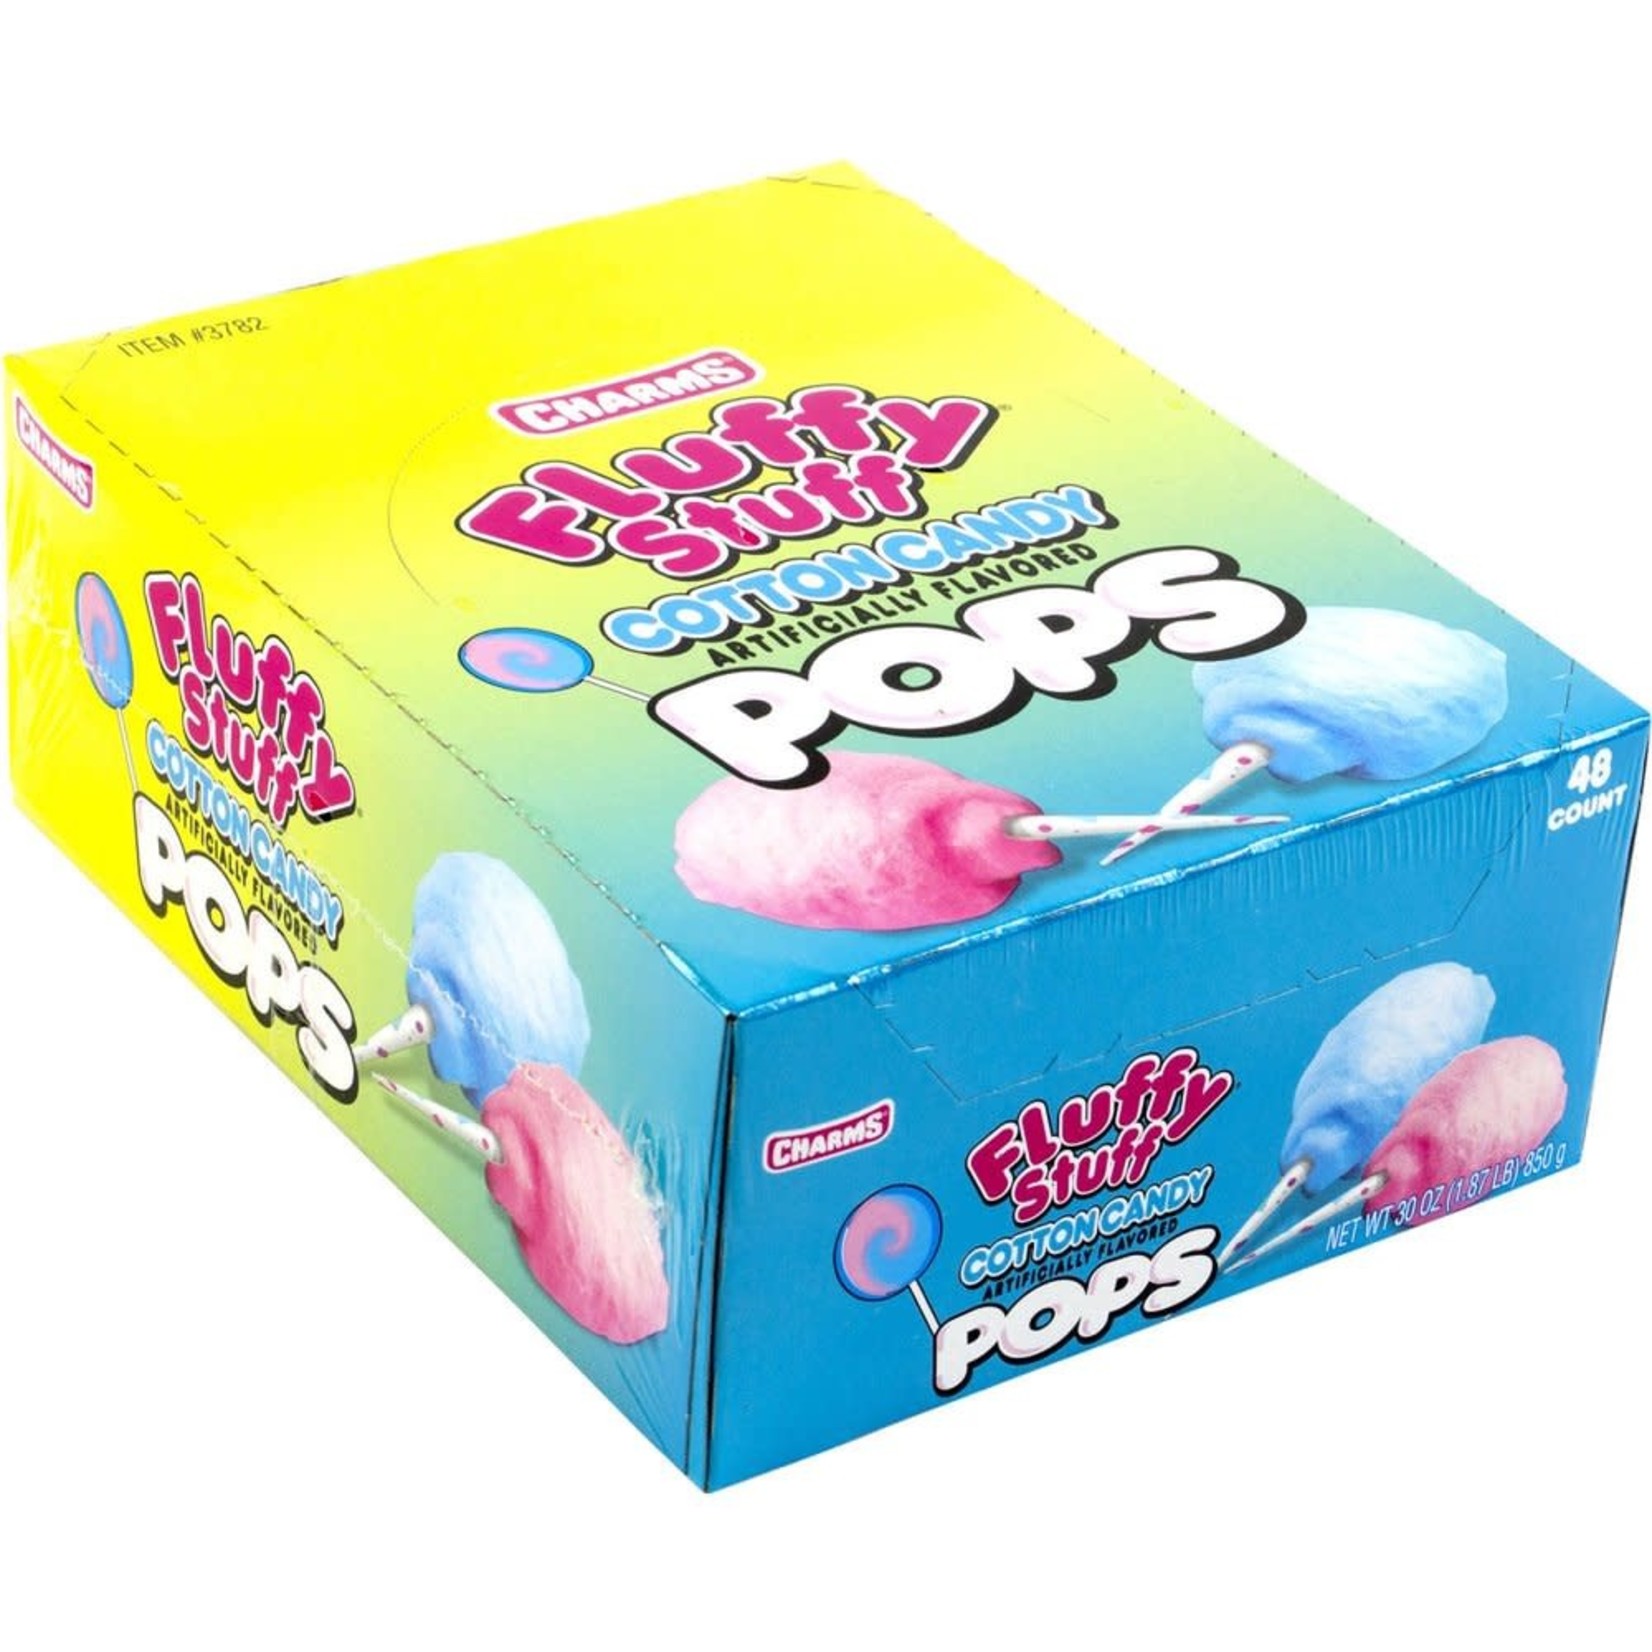 Charms Blow Pop Cotton Candy